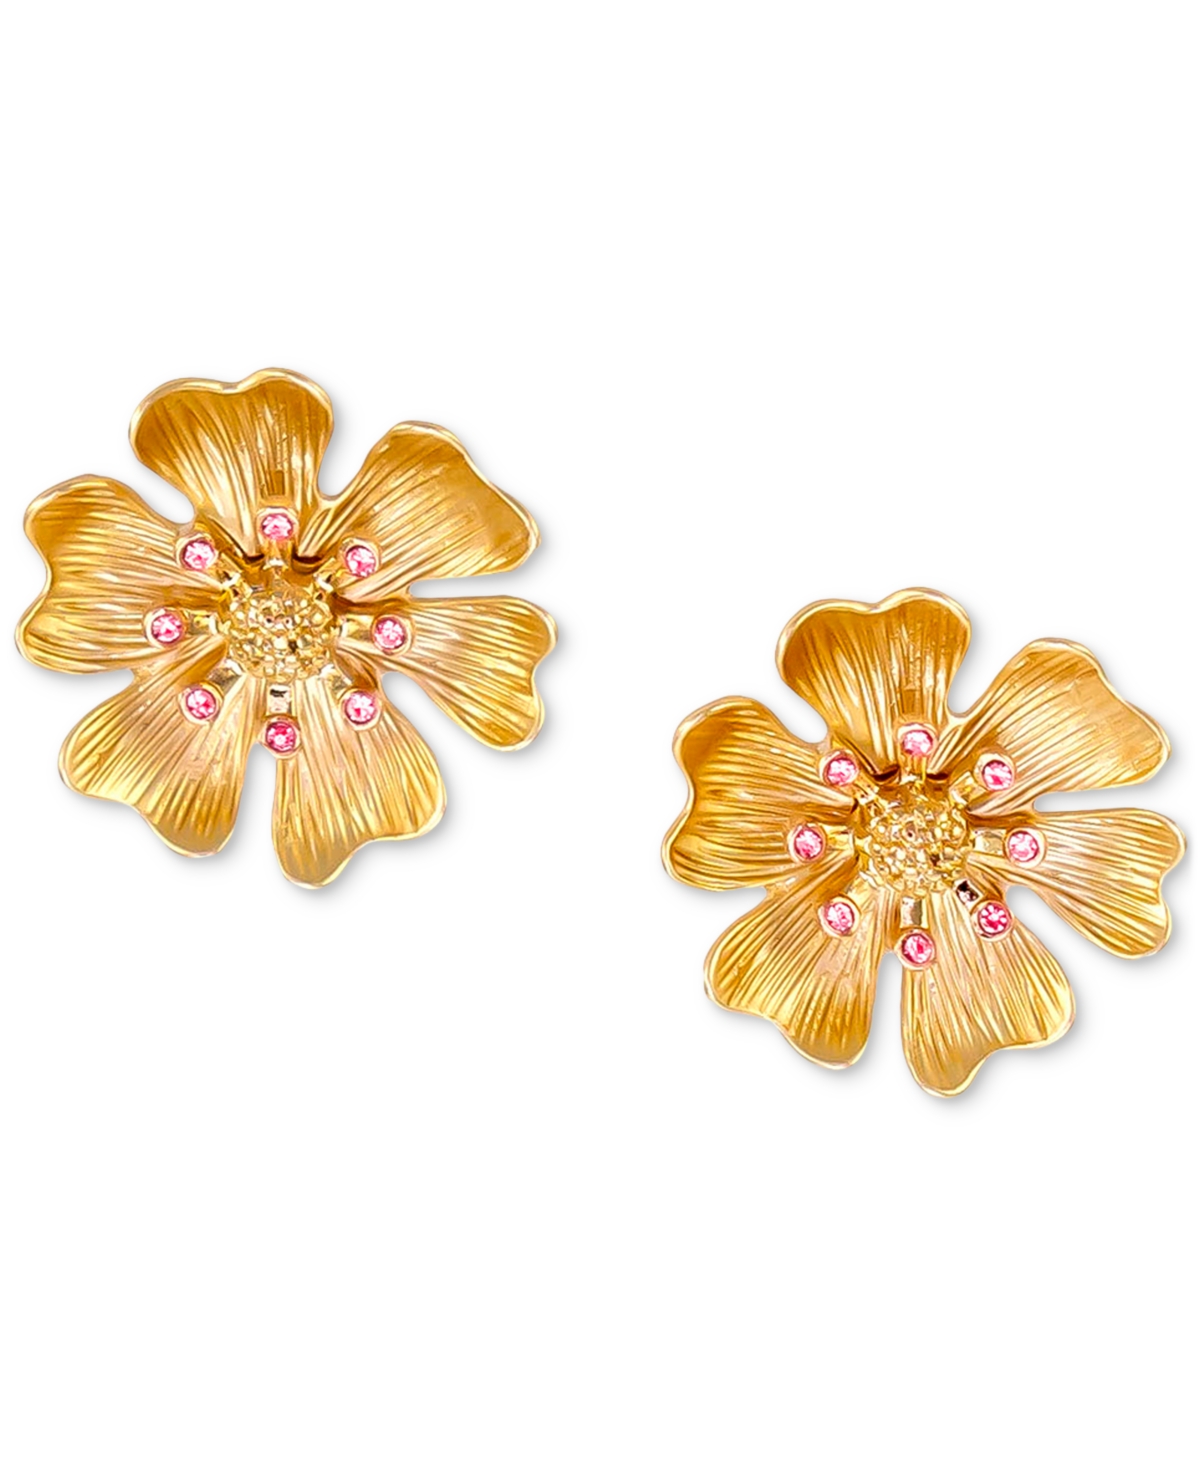 Gold-Tone Pave & Imitation Pearl Flower Button Earrings - Pink